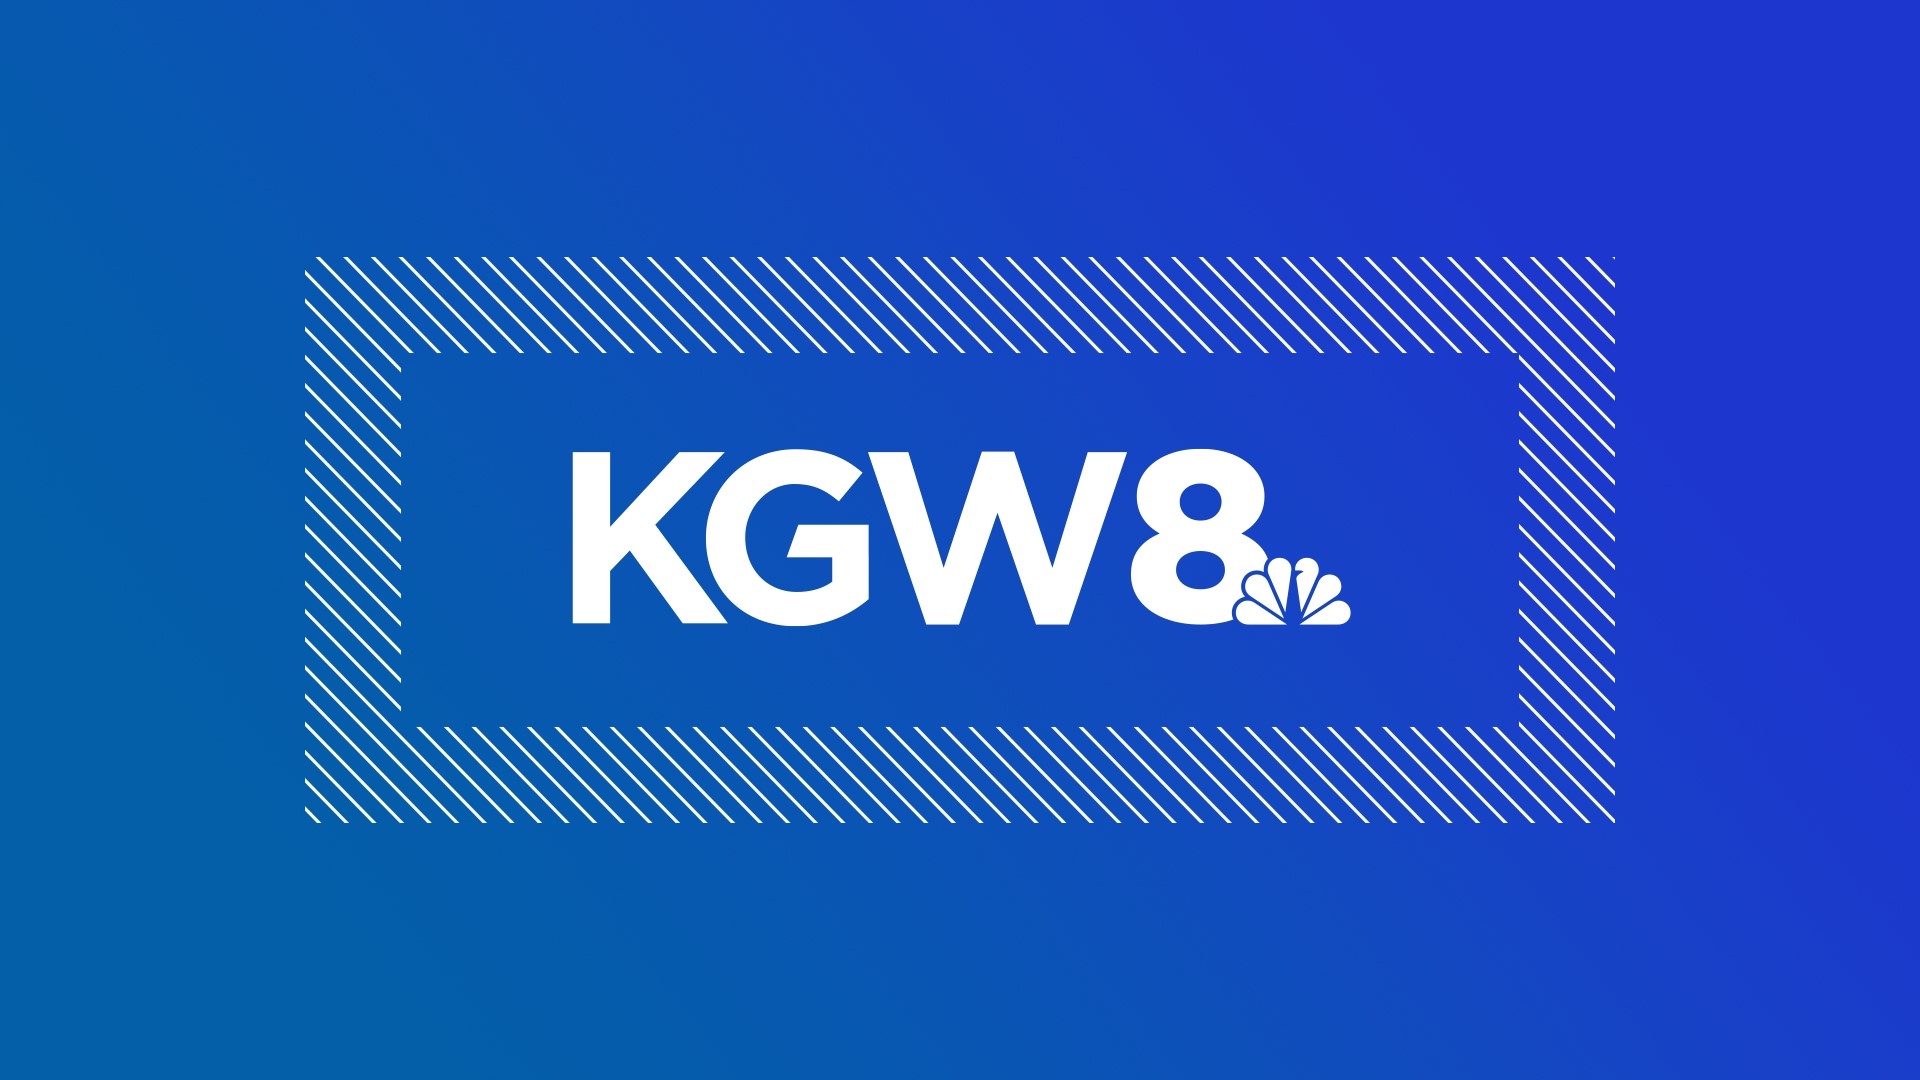 May 4, 5 p.m. evening news for KGW